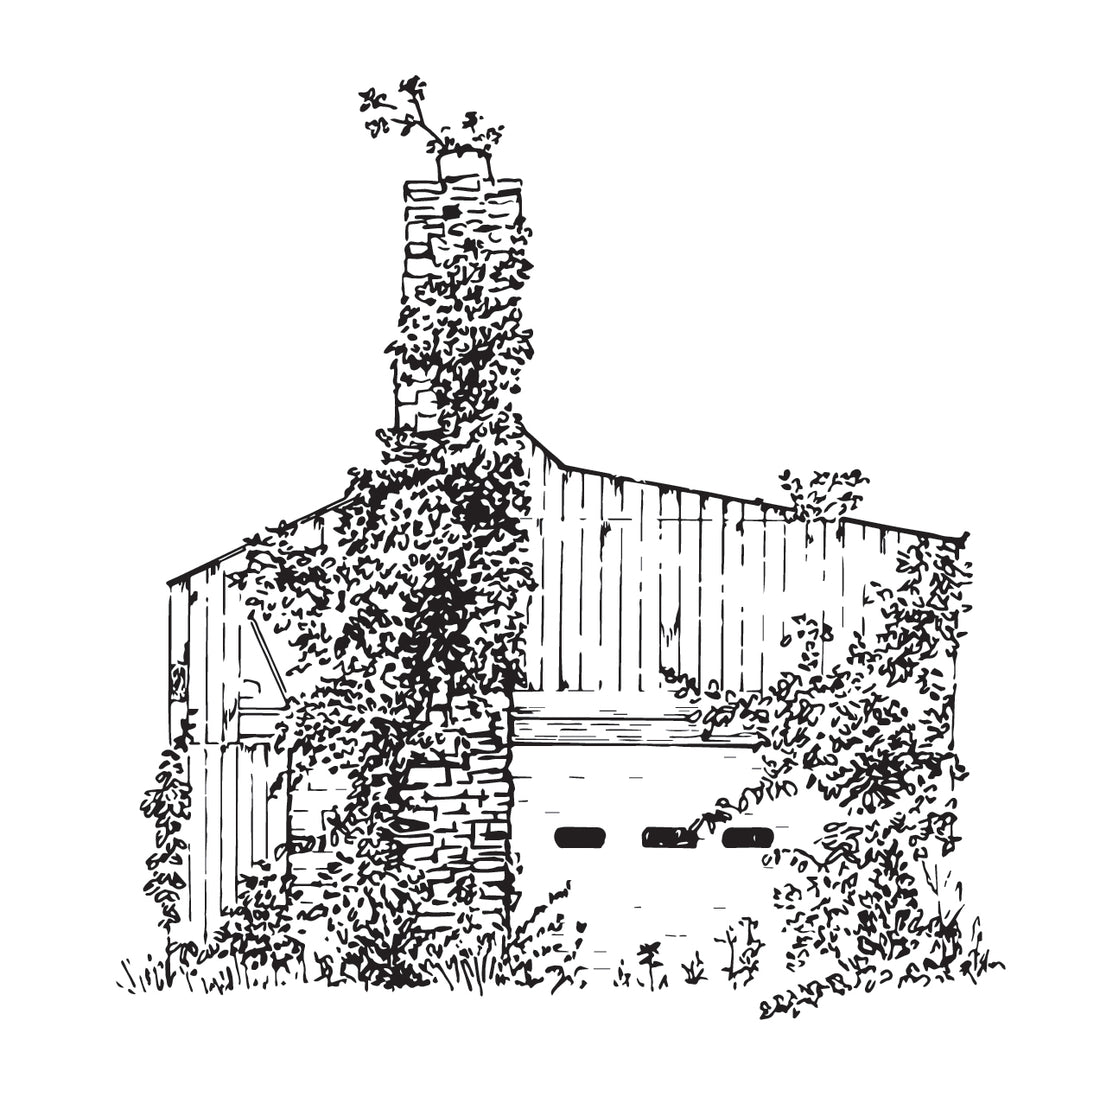 Drawing of an old barn with ivy growing on it